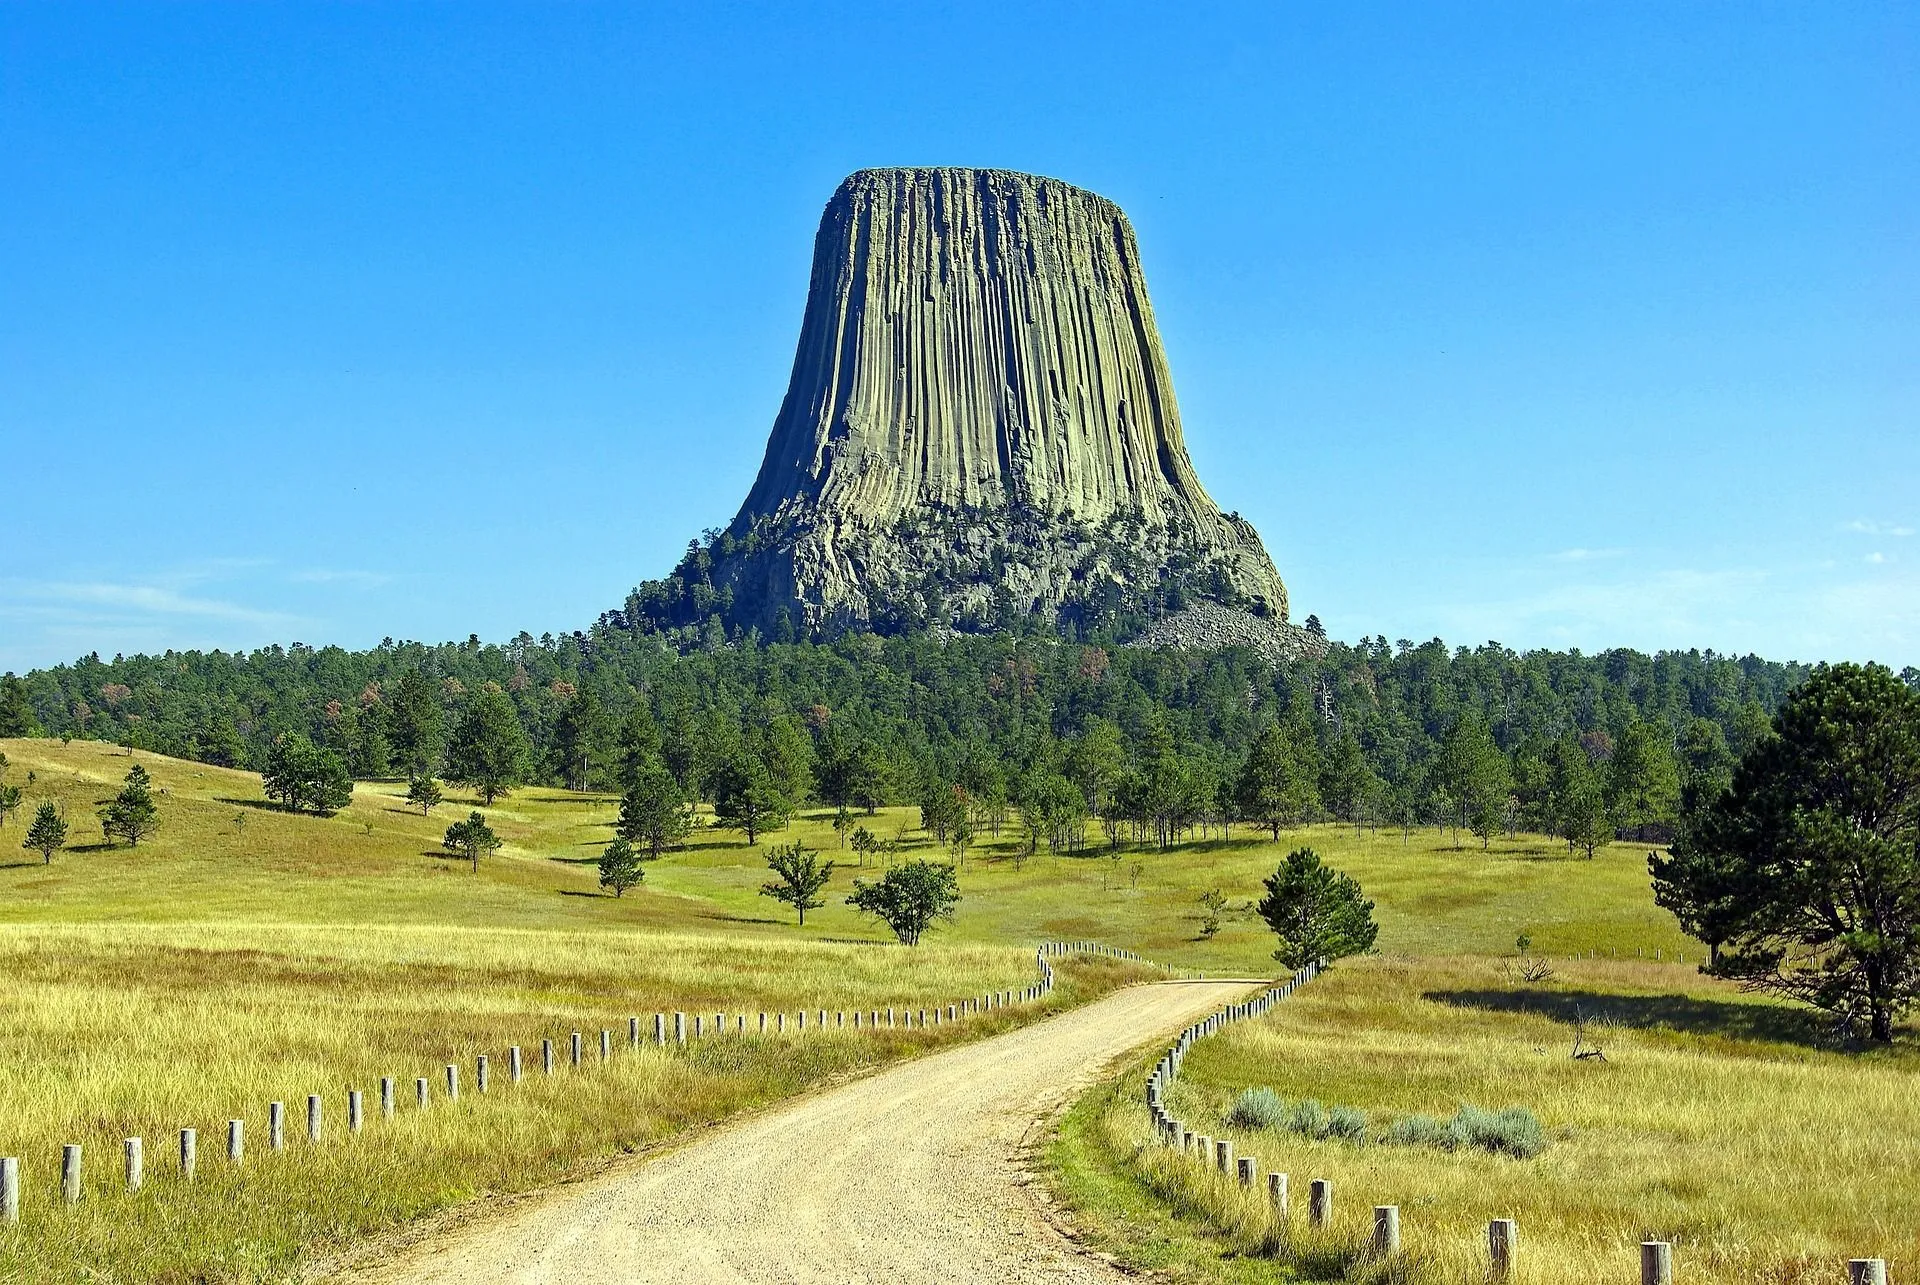 Devils Tower in Wyoming is composed of Igneous rock.